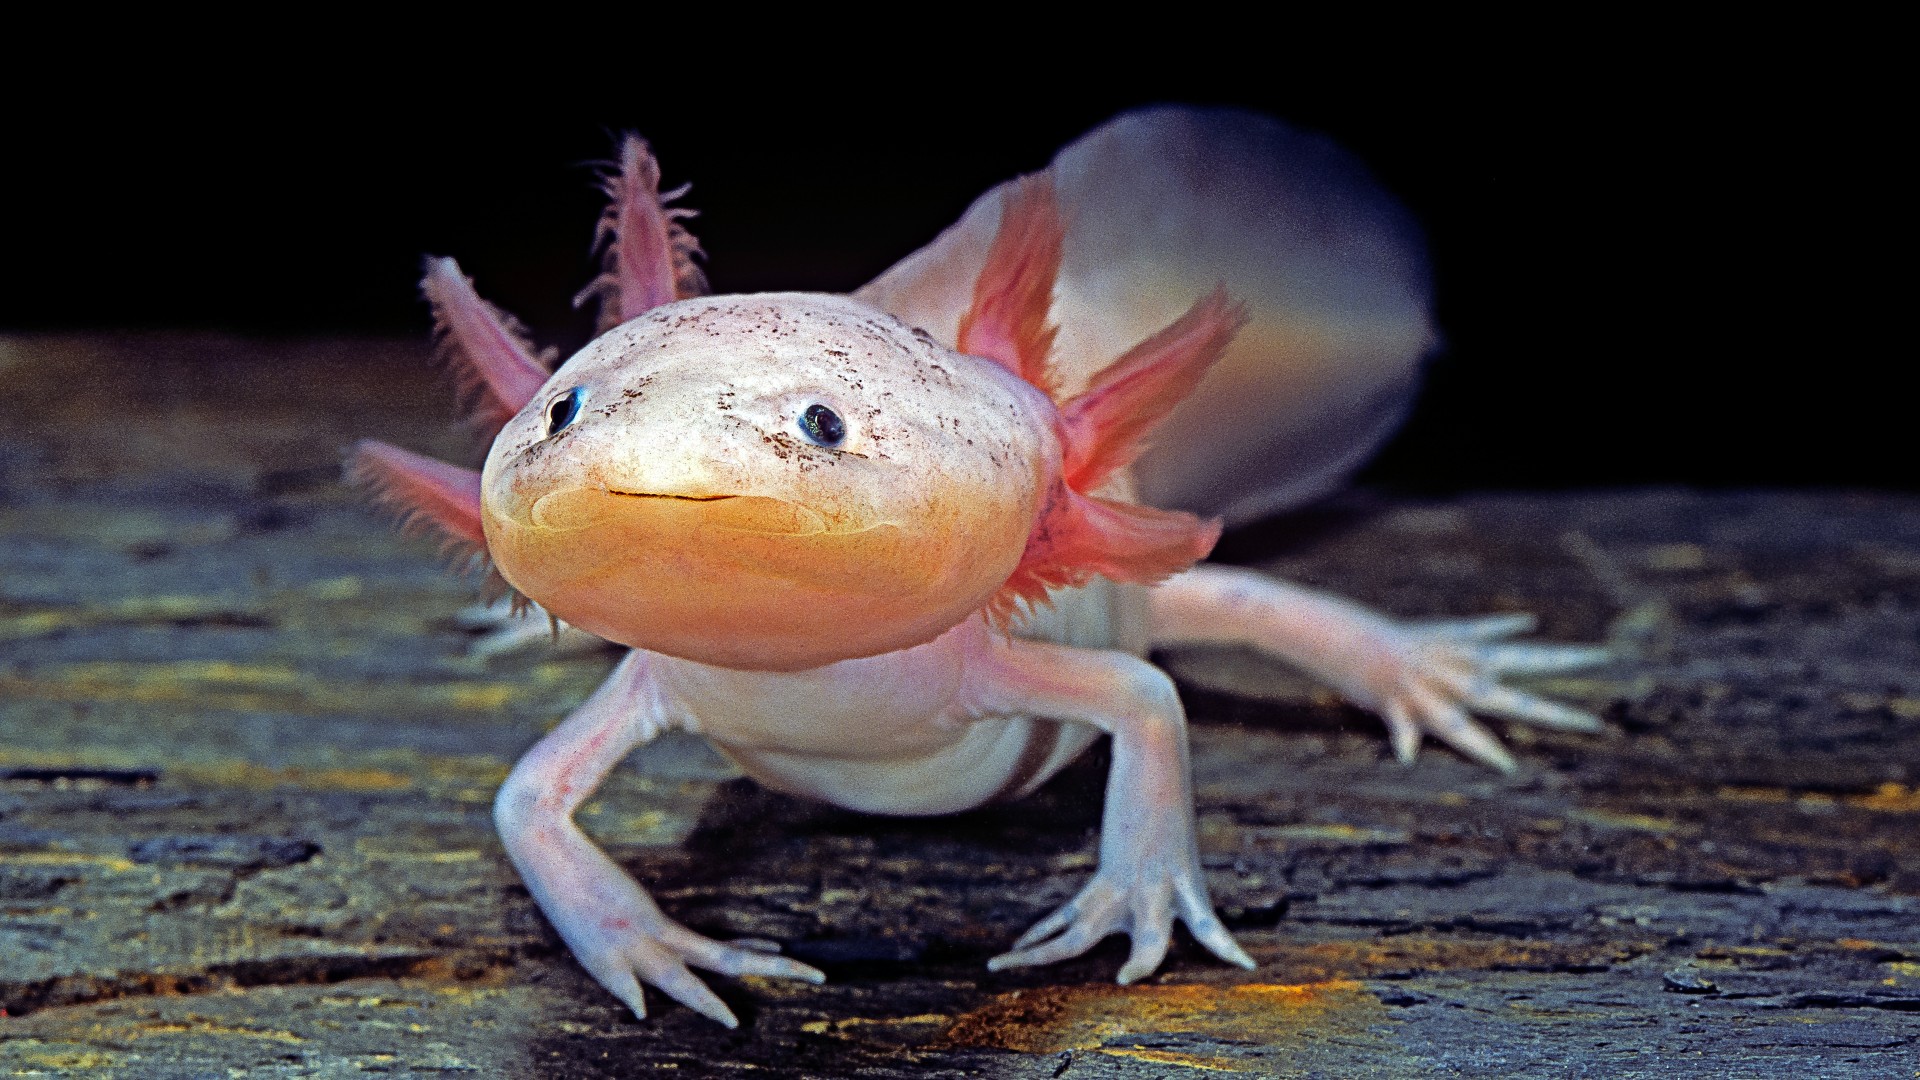 Axolotl Can Regenerate Their Brain Including Other Body Parts